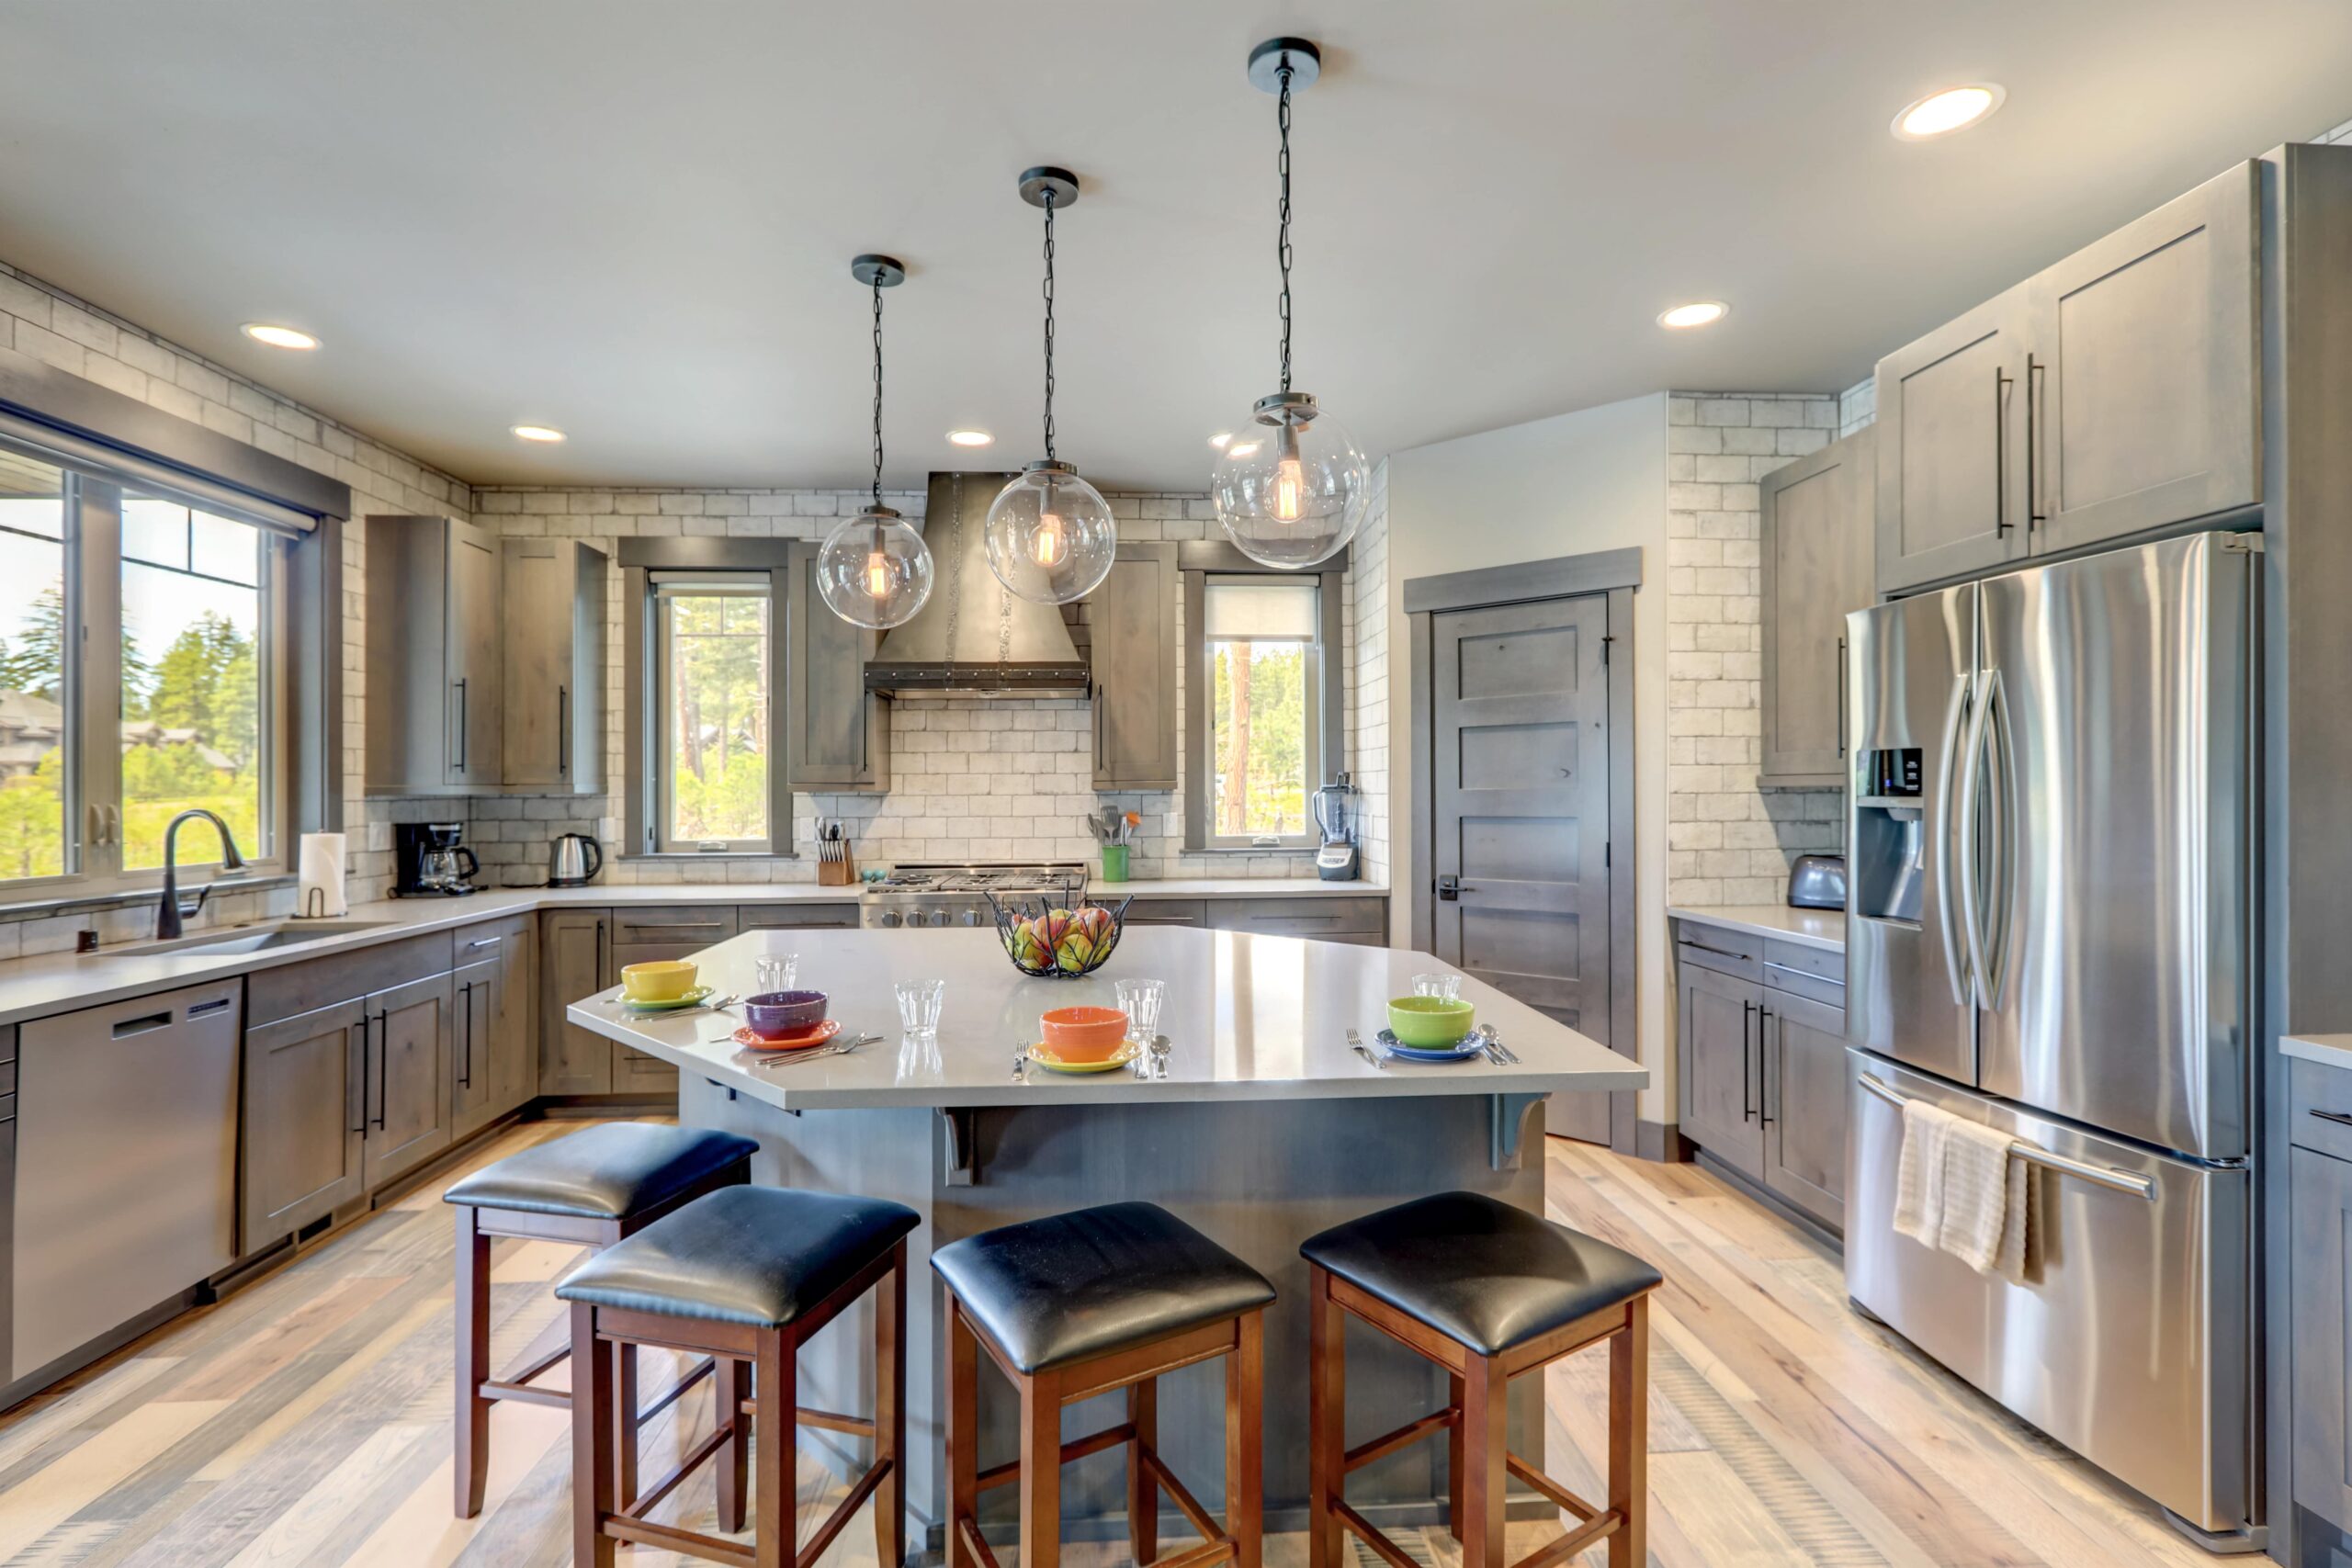 A kitchen design idea with stainless steel appliances and gray cabinets, with a granite-topped island.